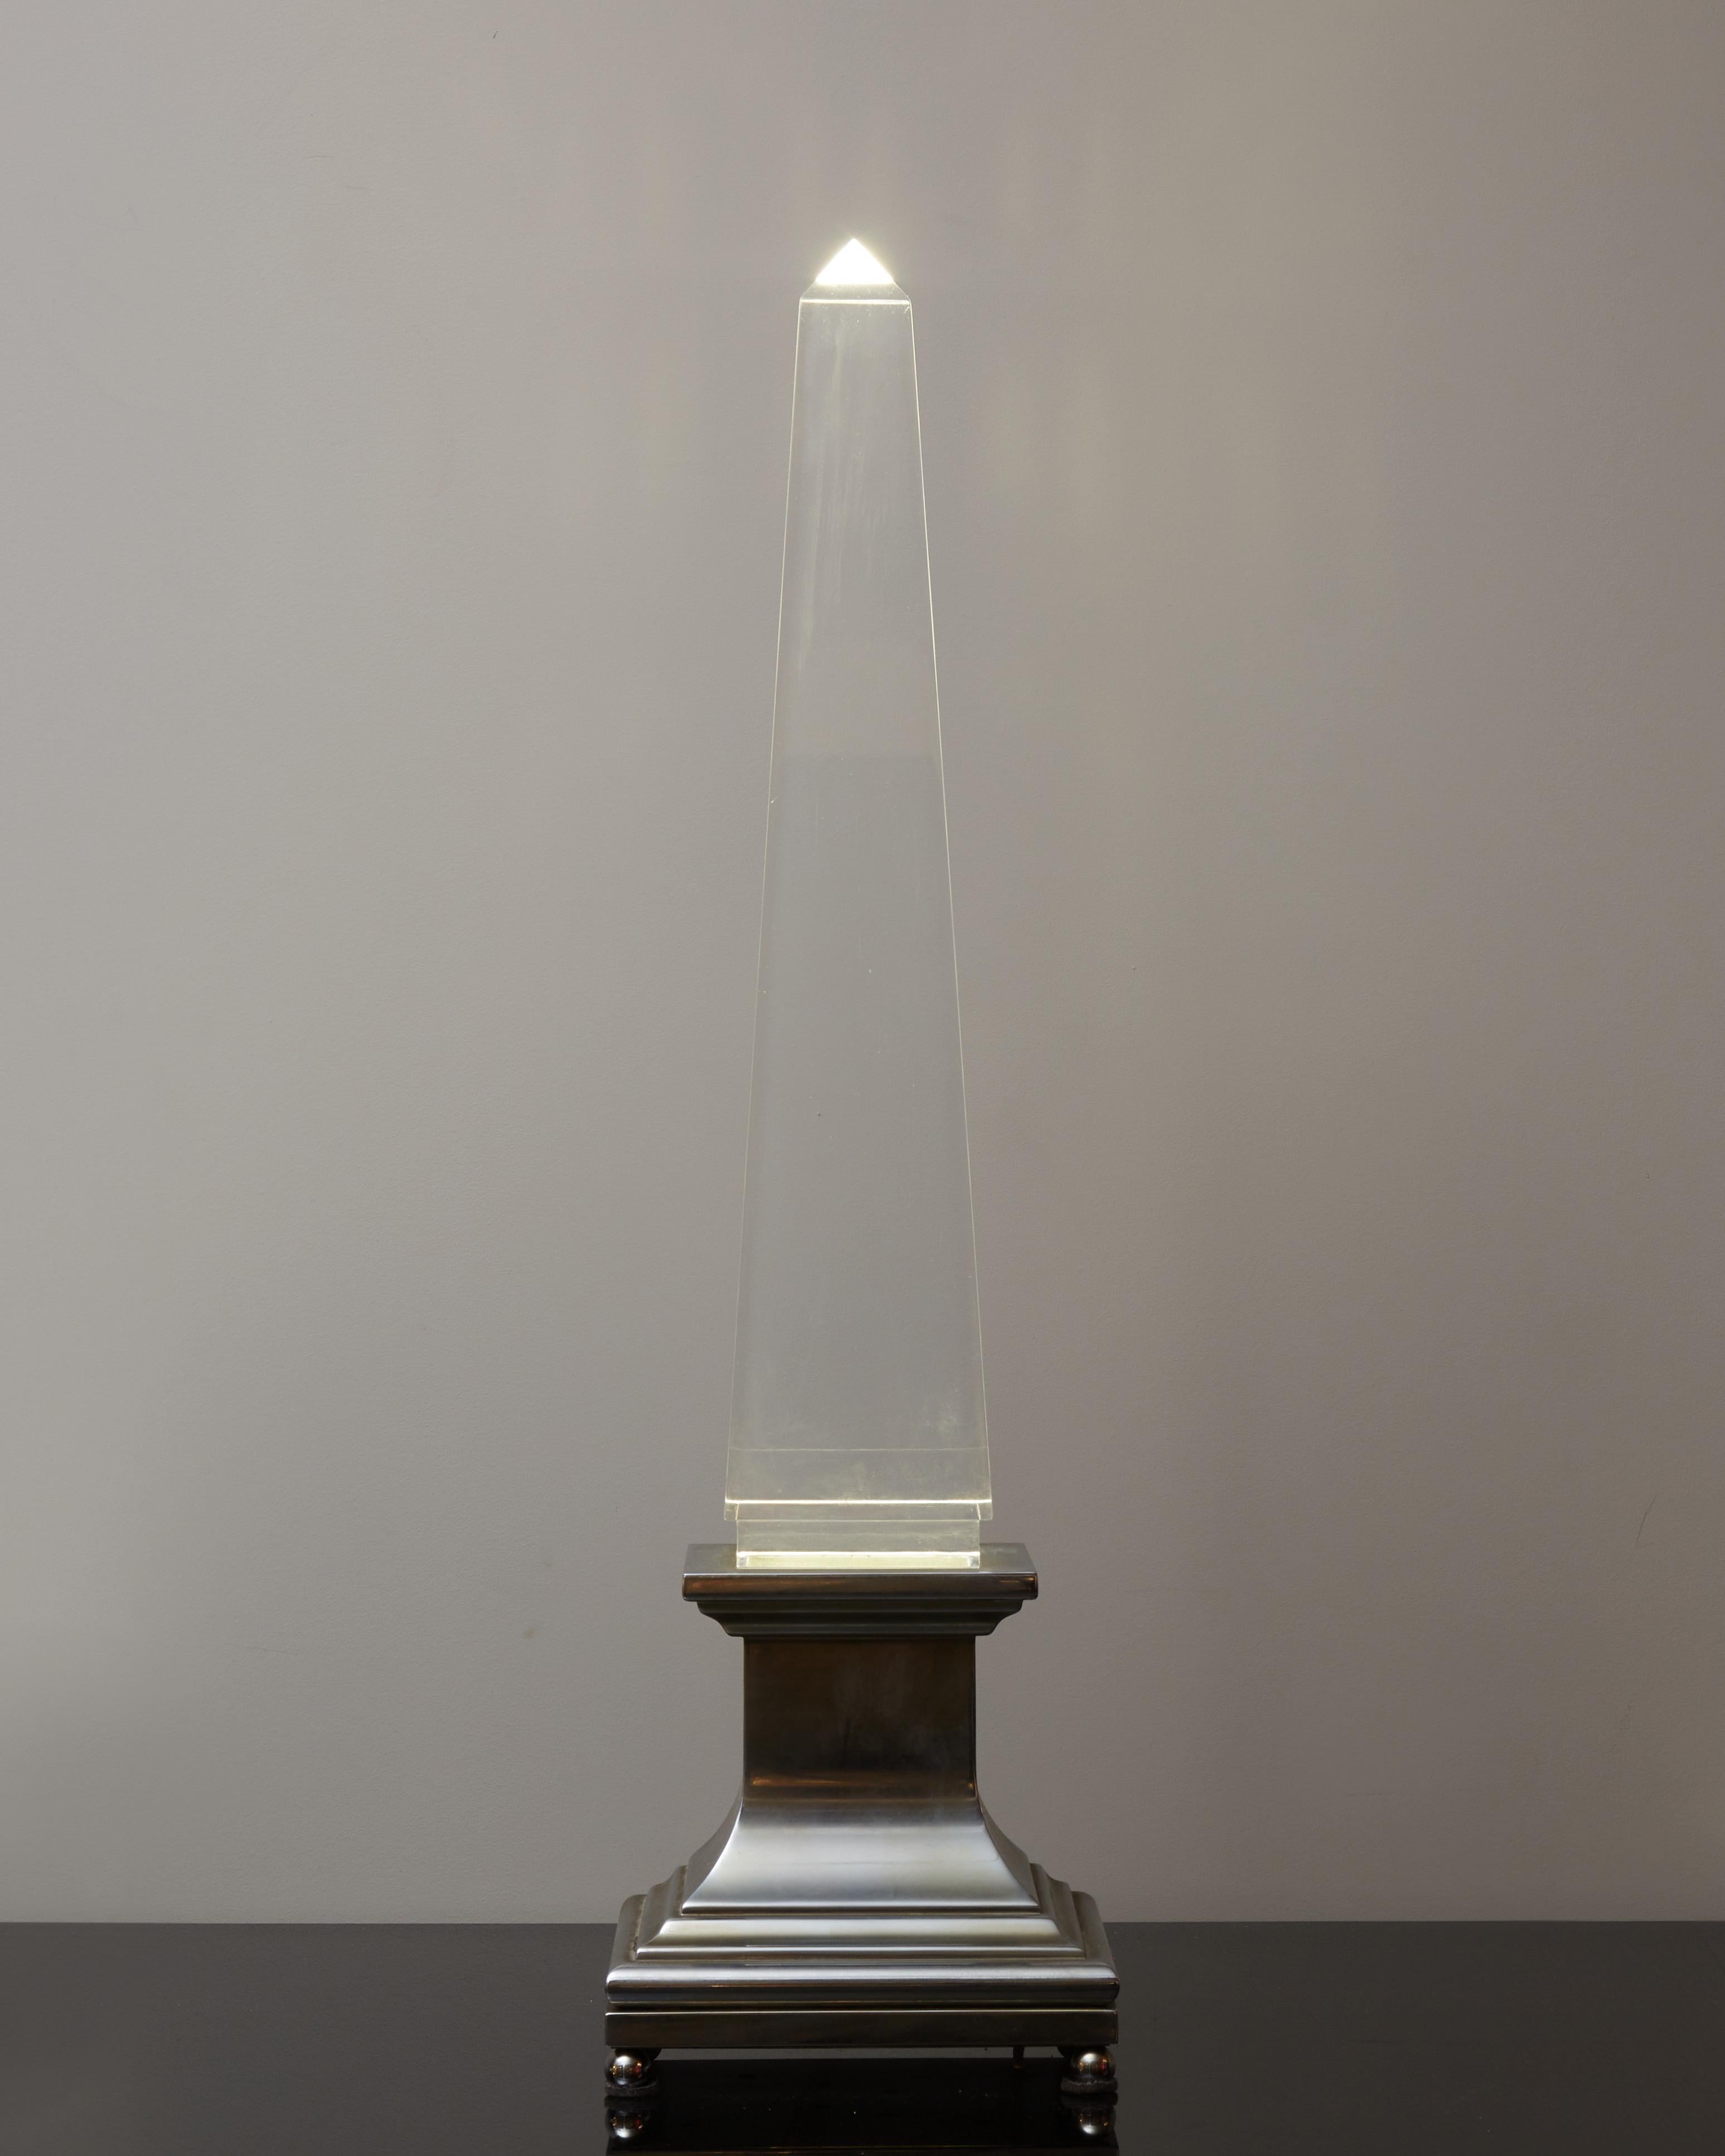 Tall table lamp designed by Sandro Petti for Maison Jansen made of a neo classique brass base in nickel finish and a flawless lucite obelisk.